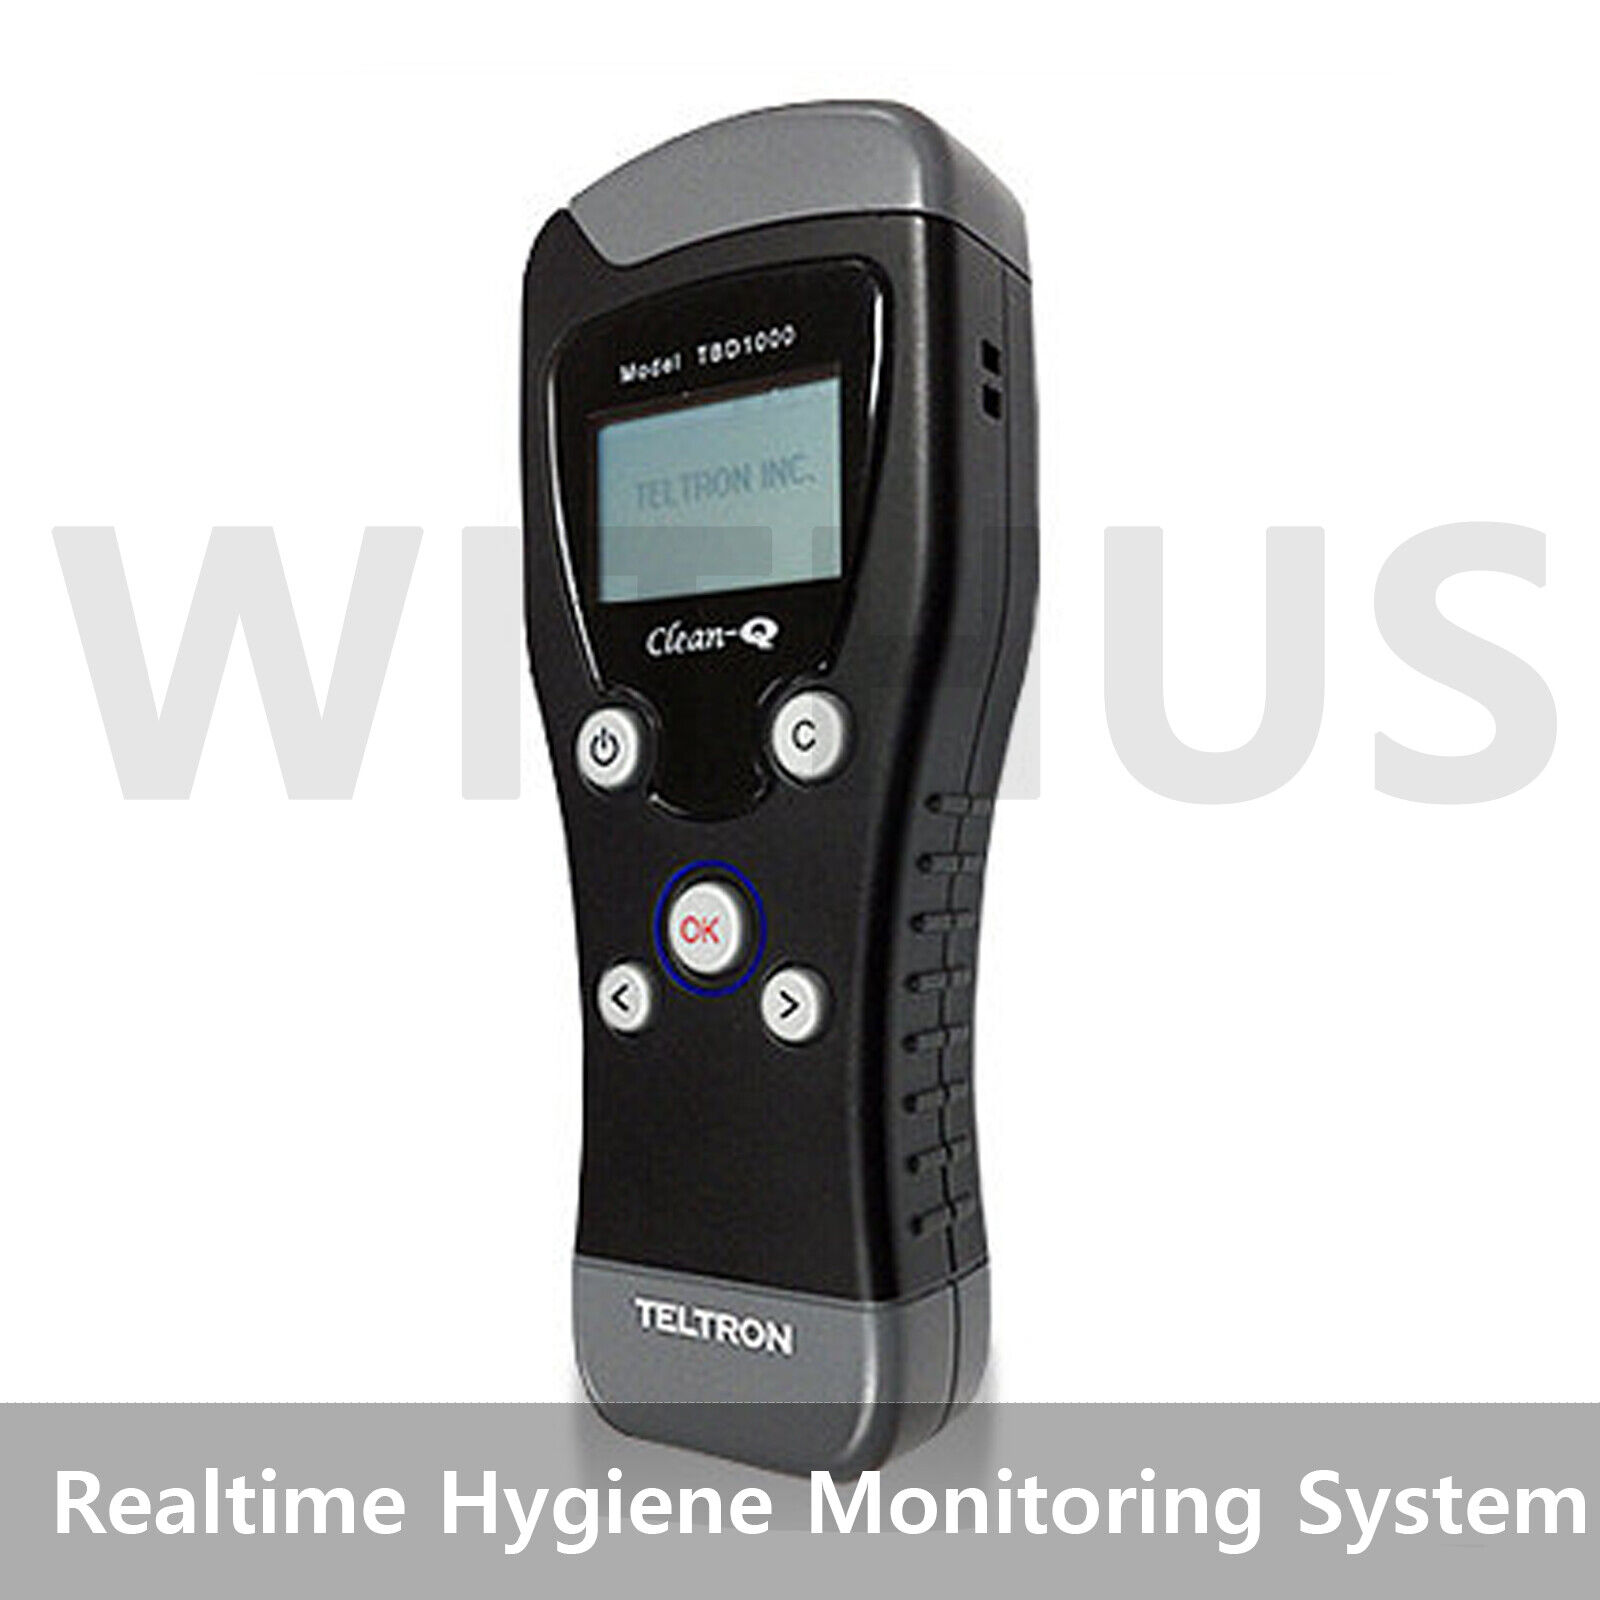 Clean-Q Real-time 10 seconds portable ATP gauge Hygiene monitoring Terminal eBay